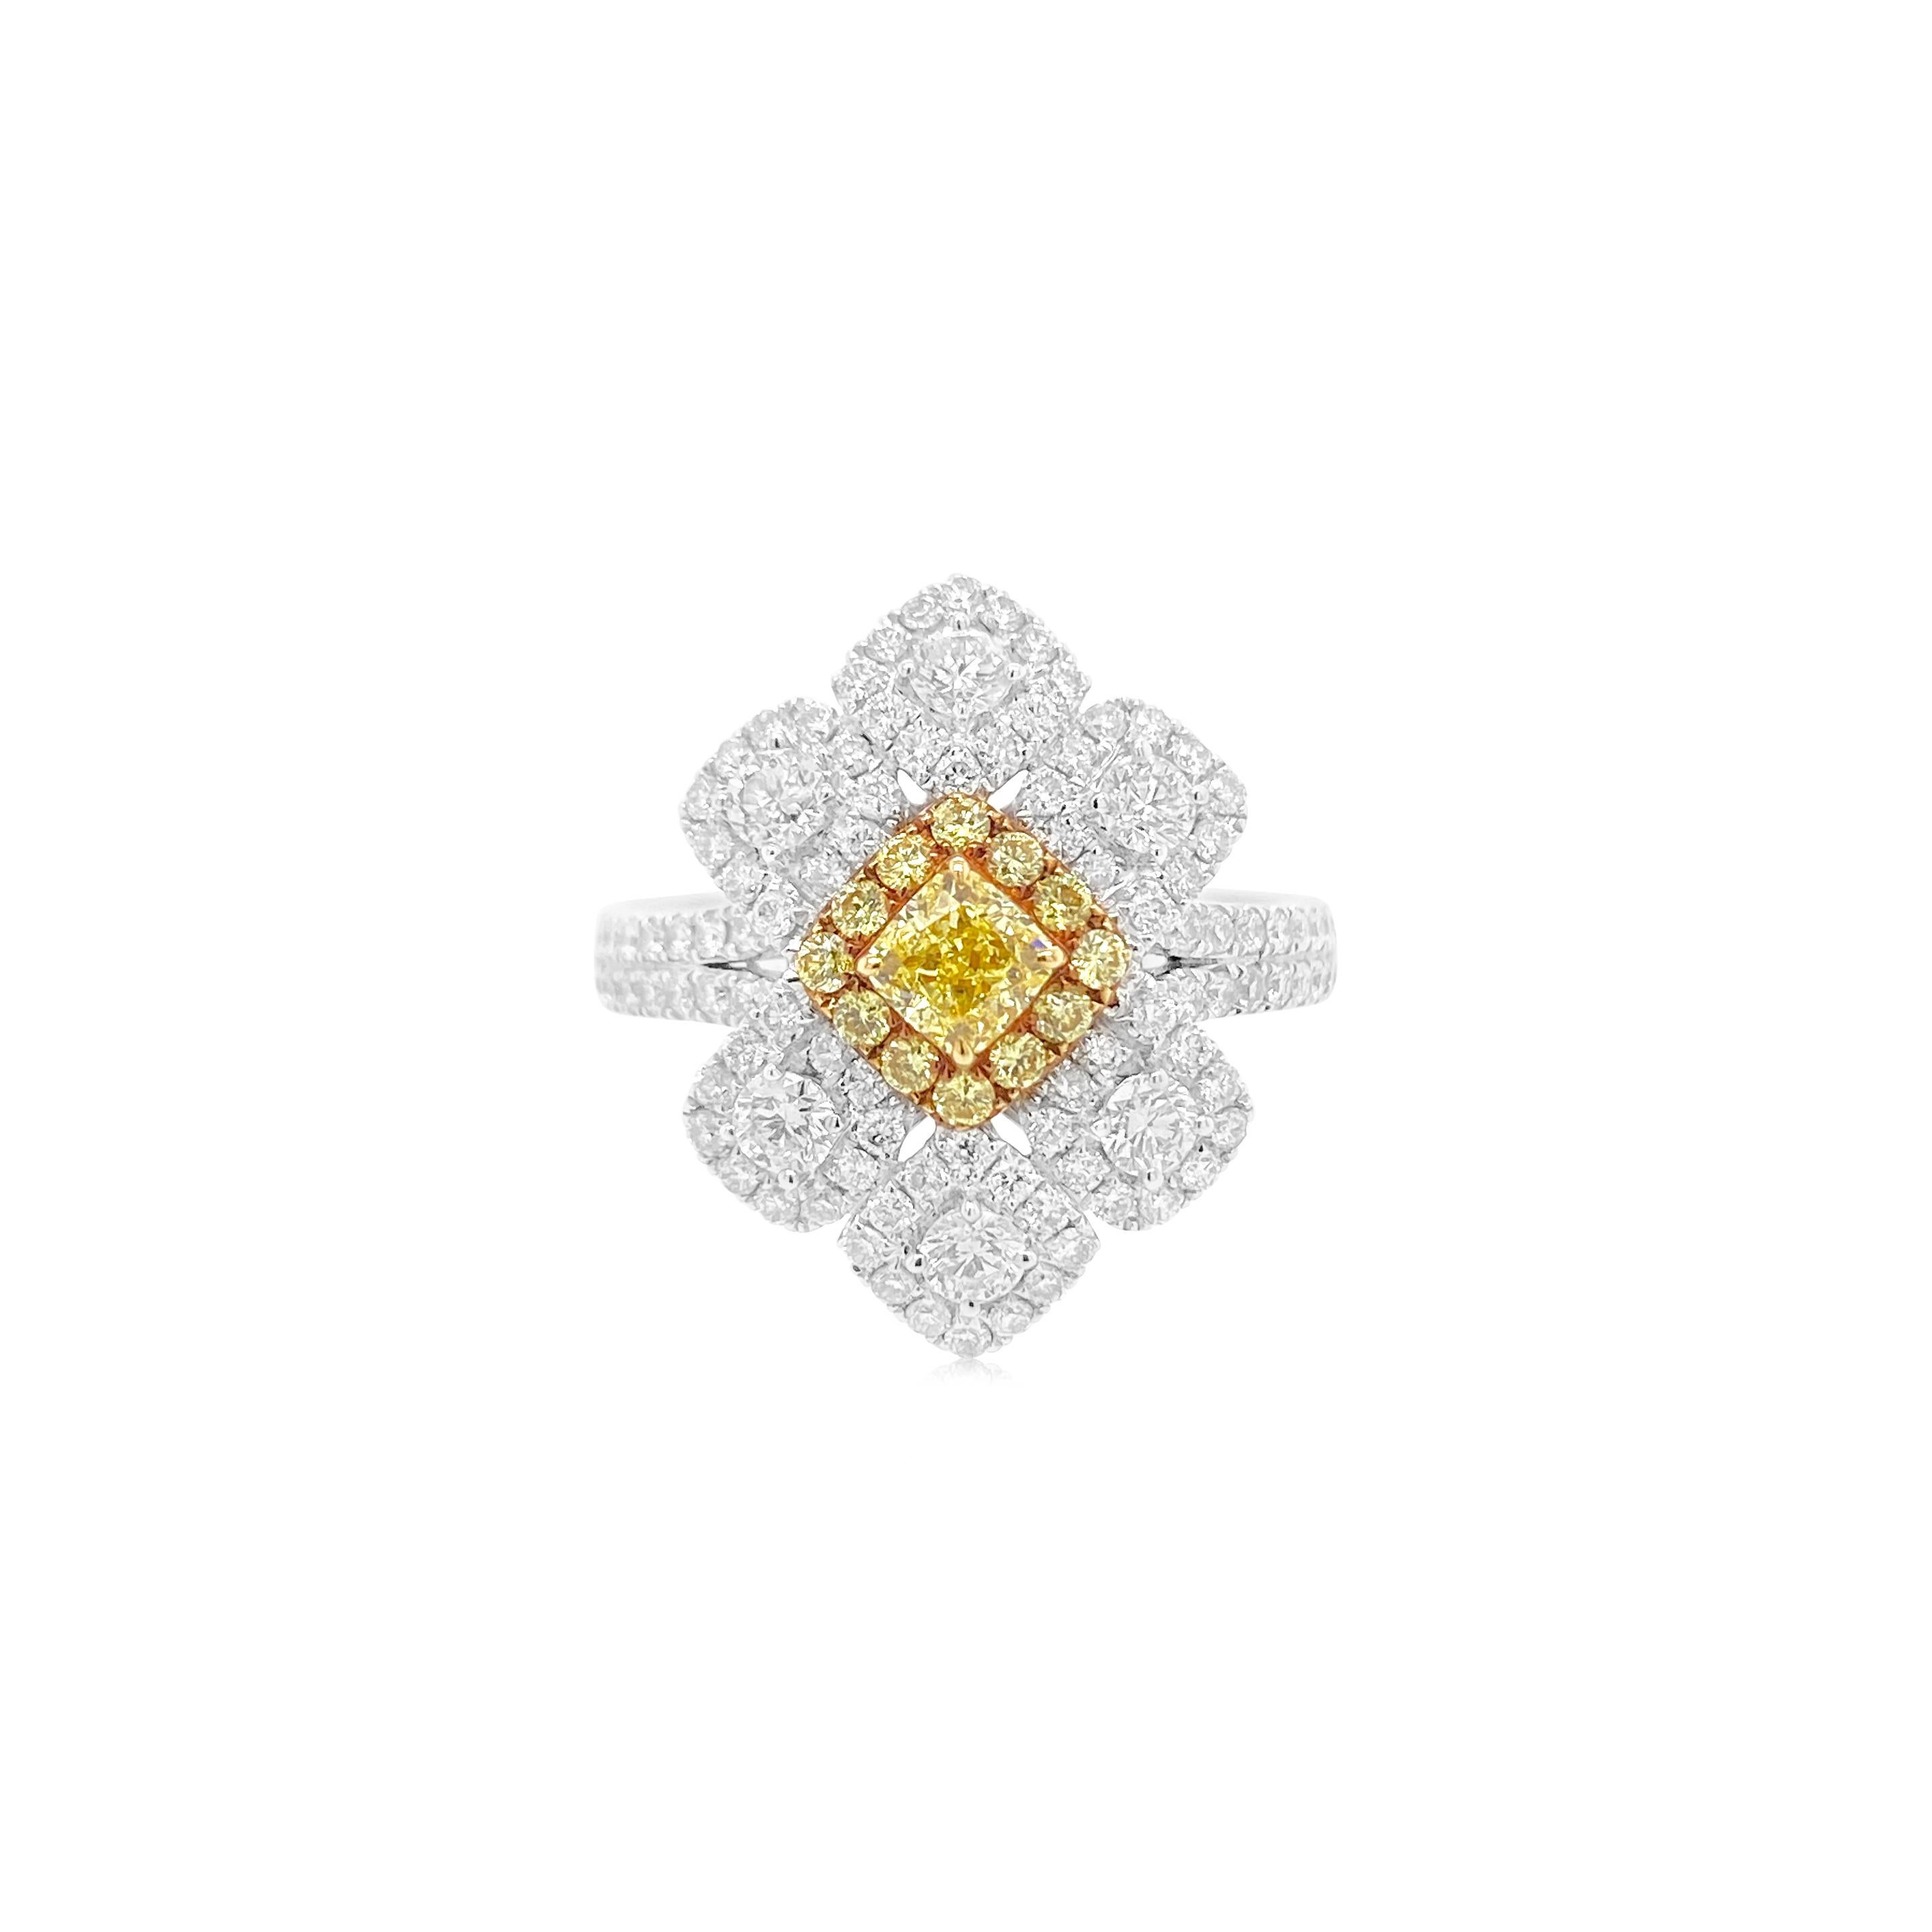 This radiant Cocktail ring is inspired by the blooming flowers of Spring. Feel rejuvenated and inspired with this Ring with a certified Intense Yellow diamond in the center, decorated with white diamond motifs.

Center Yellow Diamond - 0.338 cts,